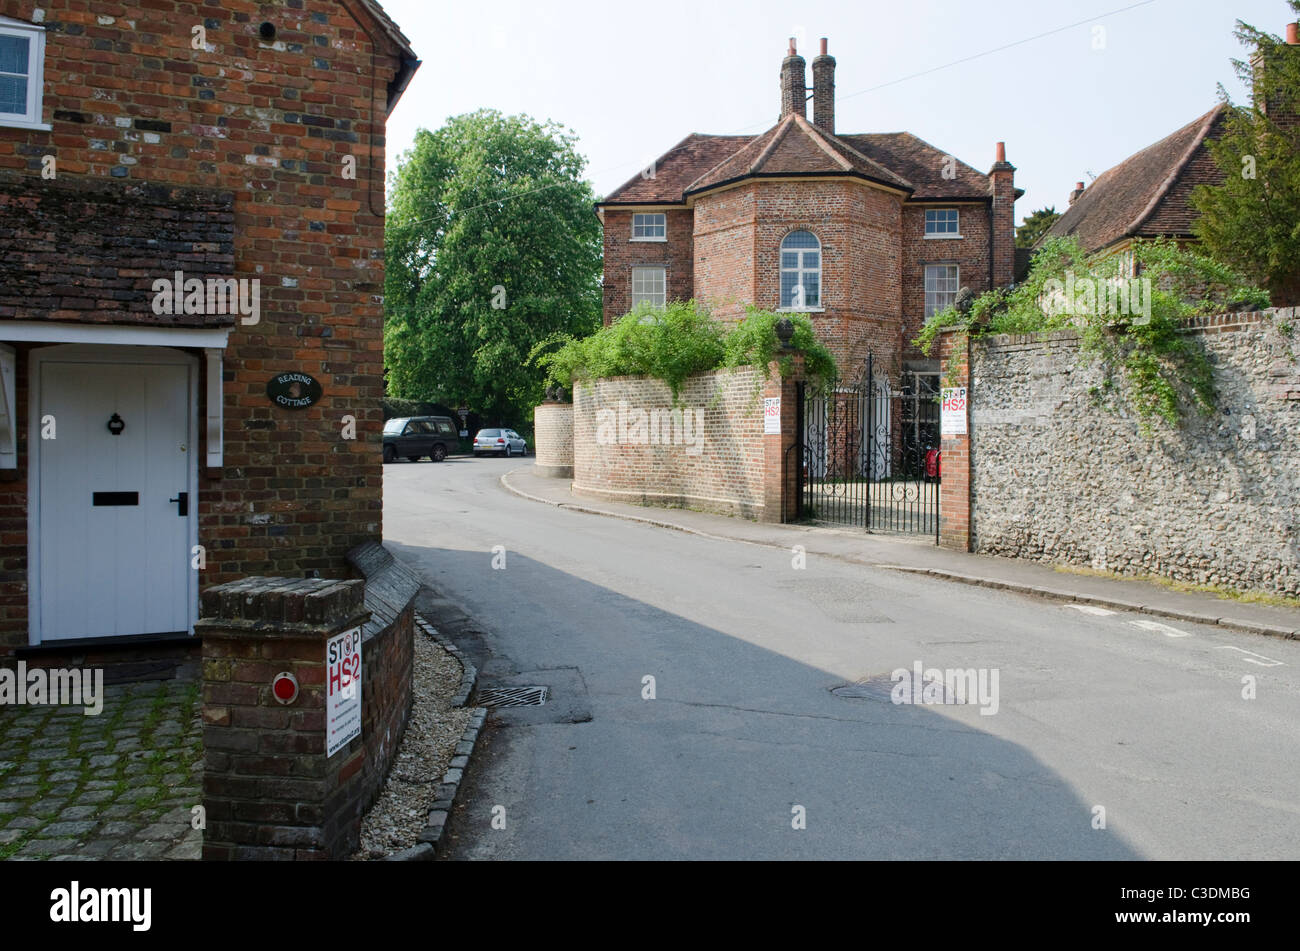 Opponents of the proposed HS2 high speed rail project show their posters in the village of Little Missenden Stock Photo